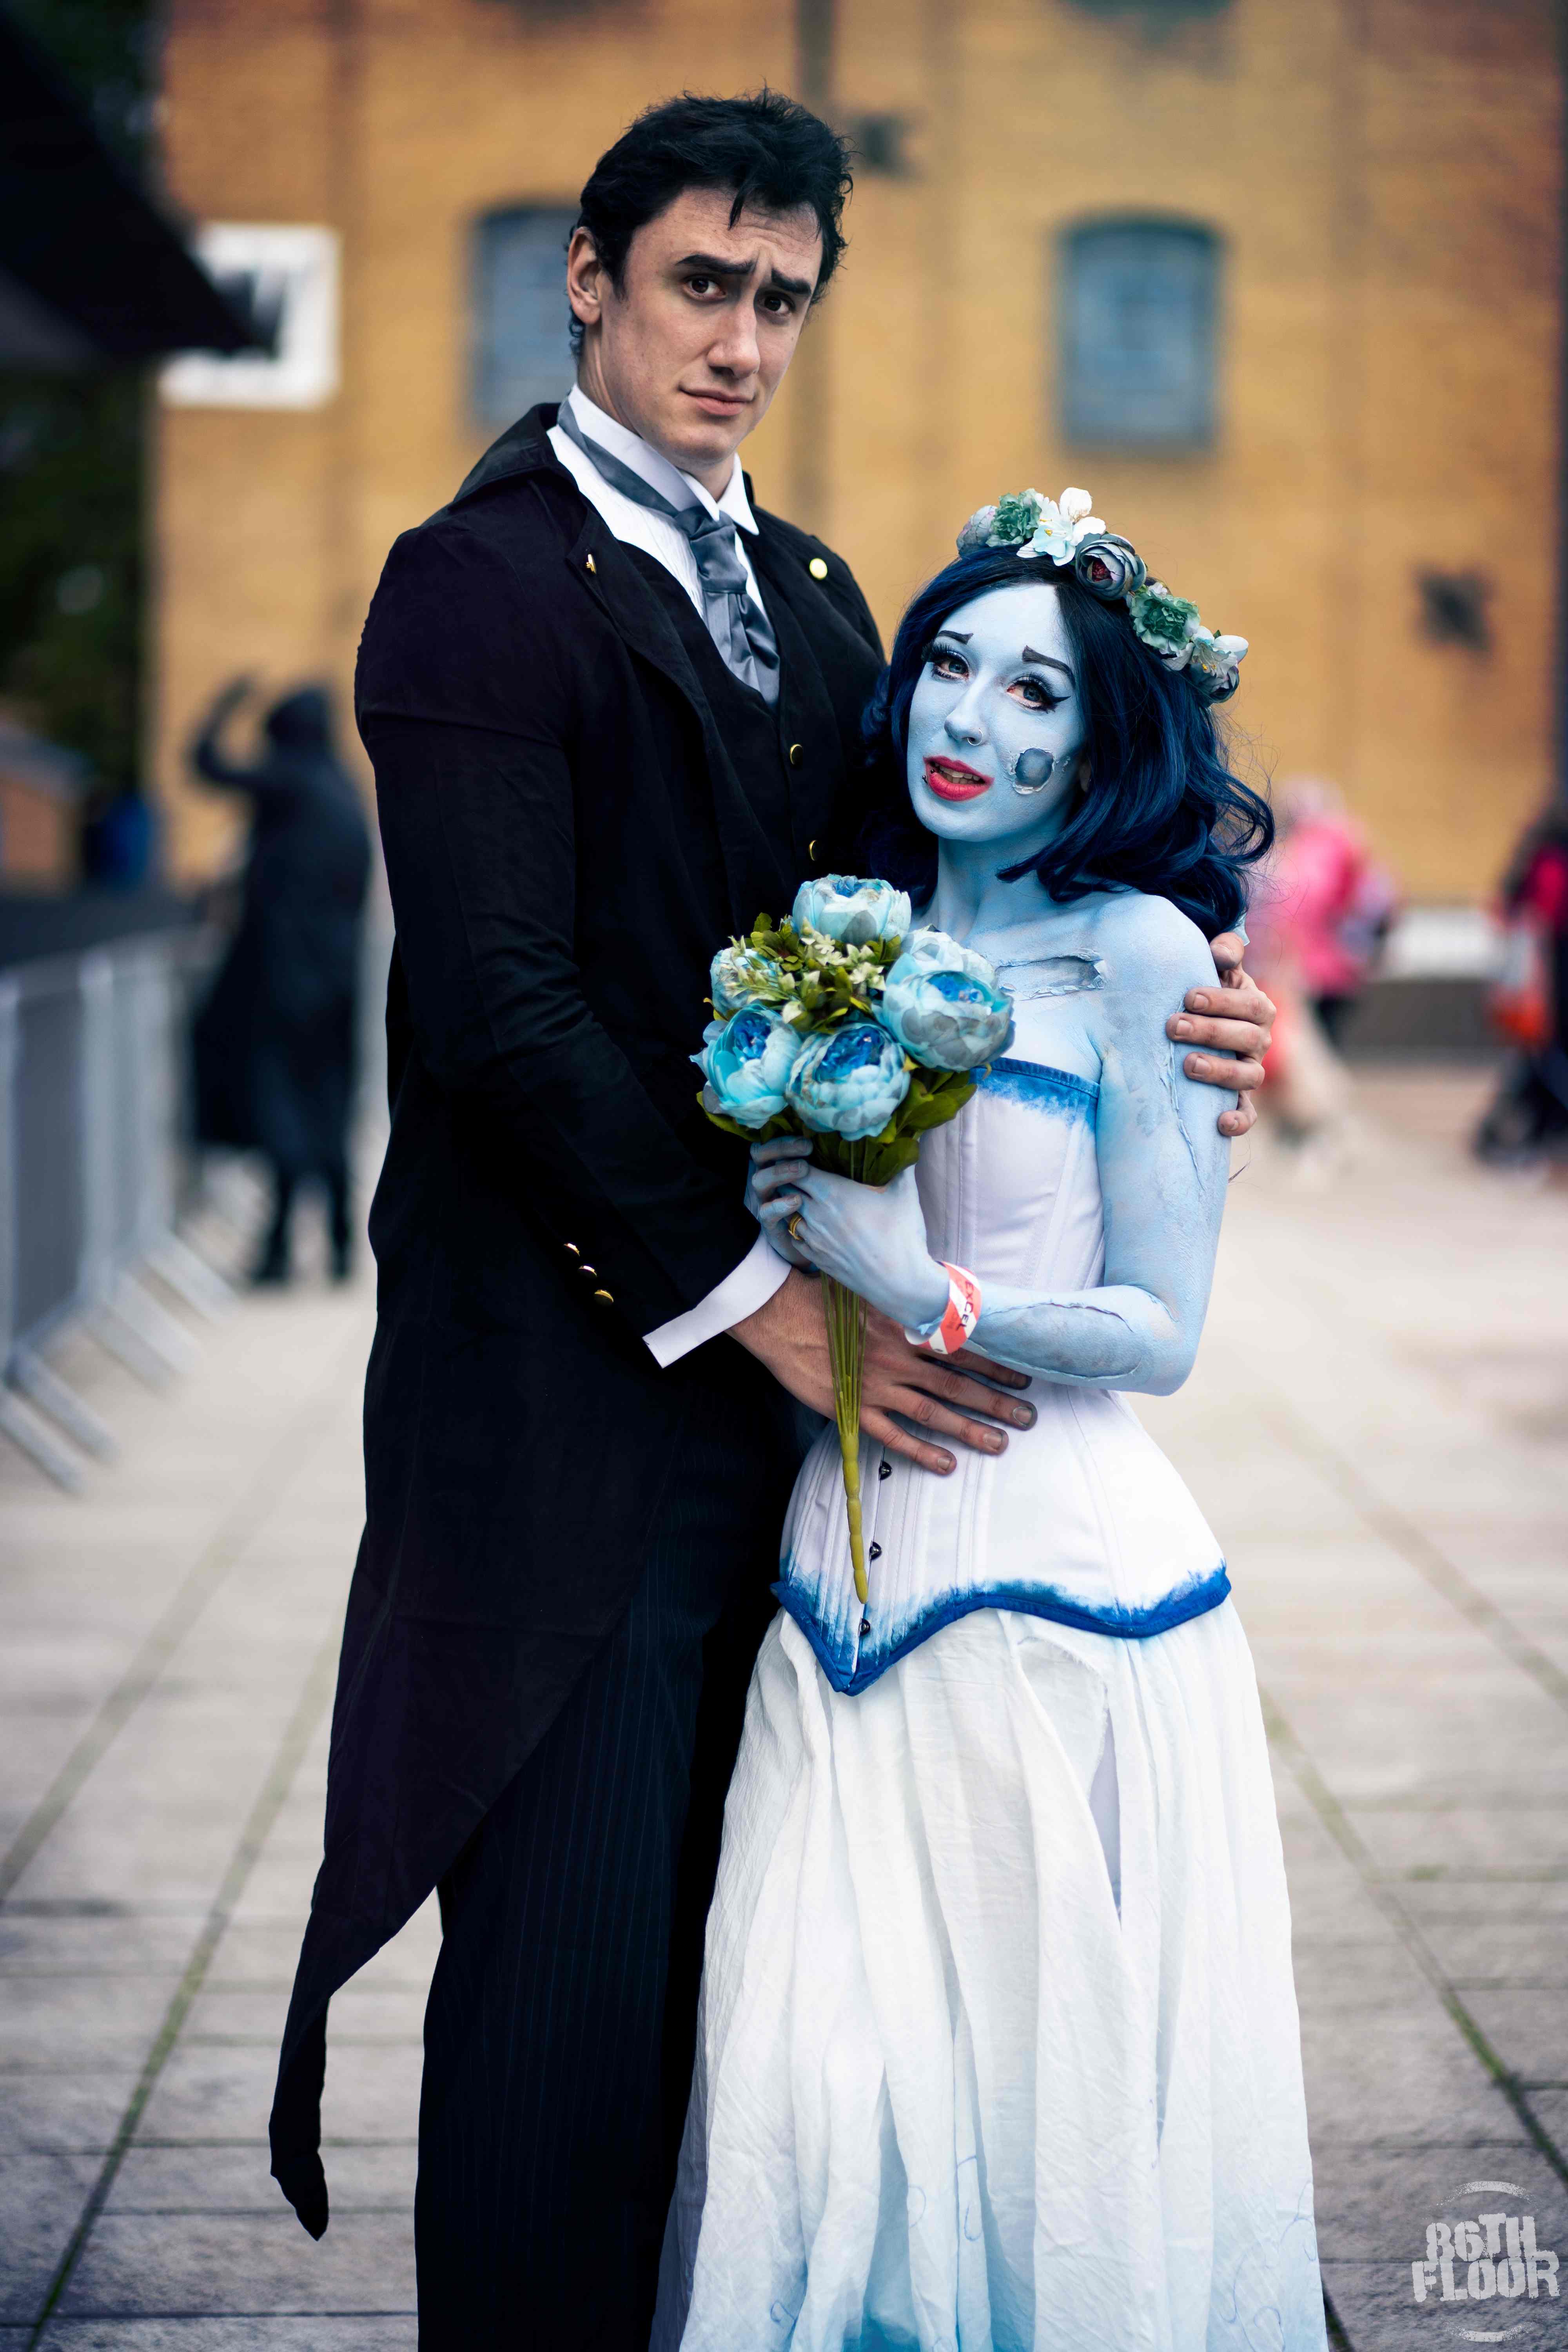 Corpse Bride cosplayers from MCM London ComicCon October 2021